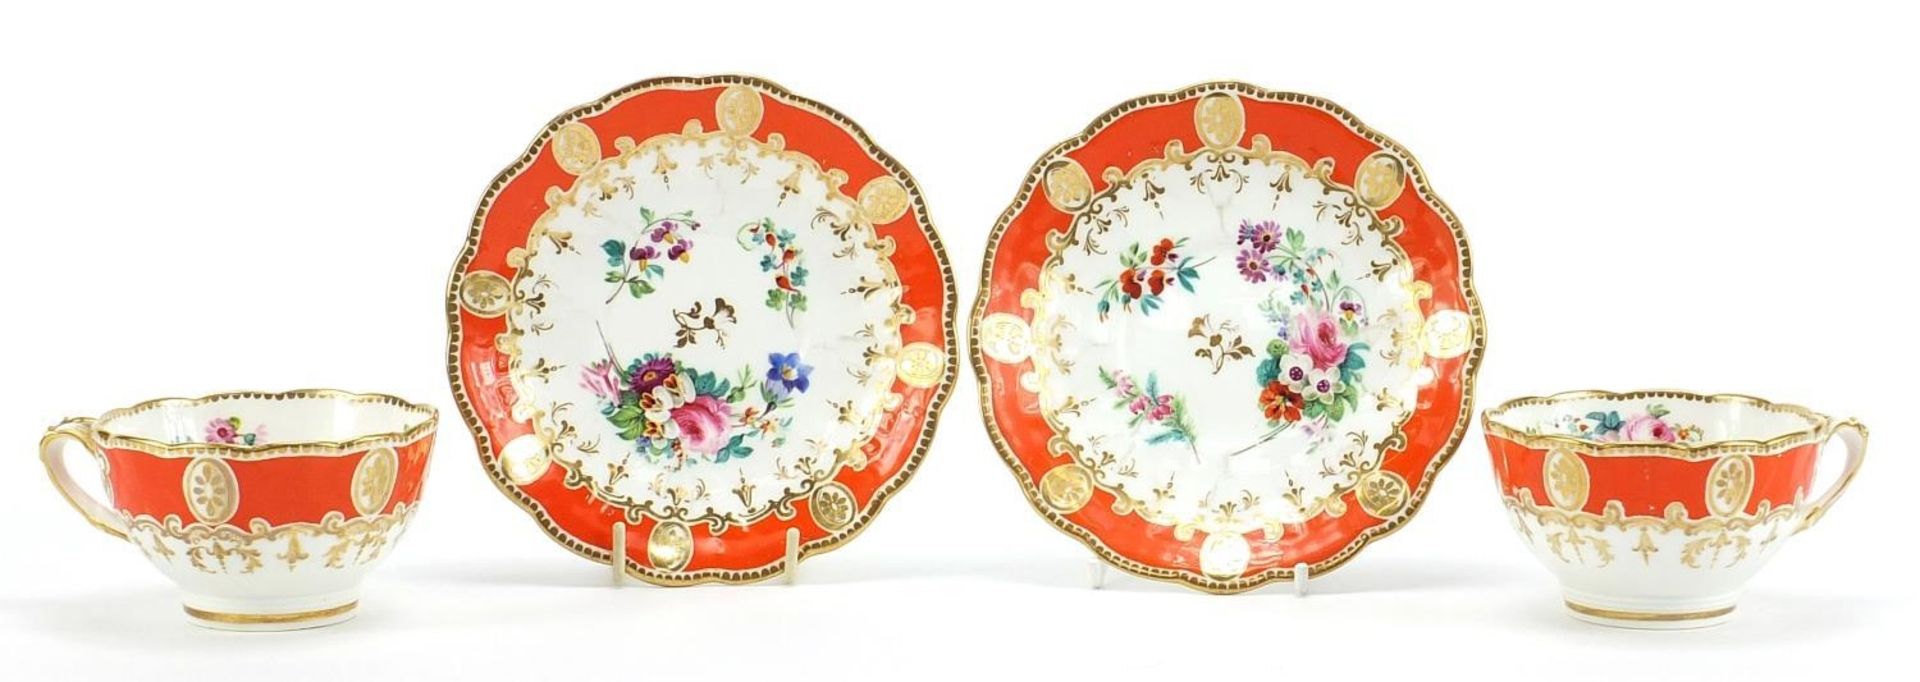 Pair of 19th century porcelain cups and saucers finely hand painted with flowers, numbered 1743,